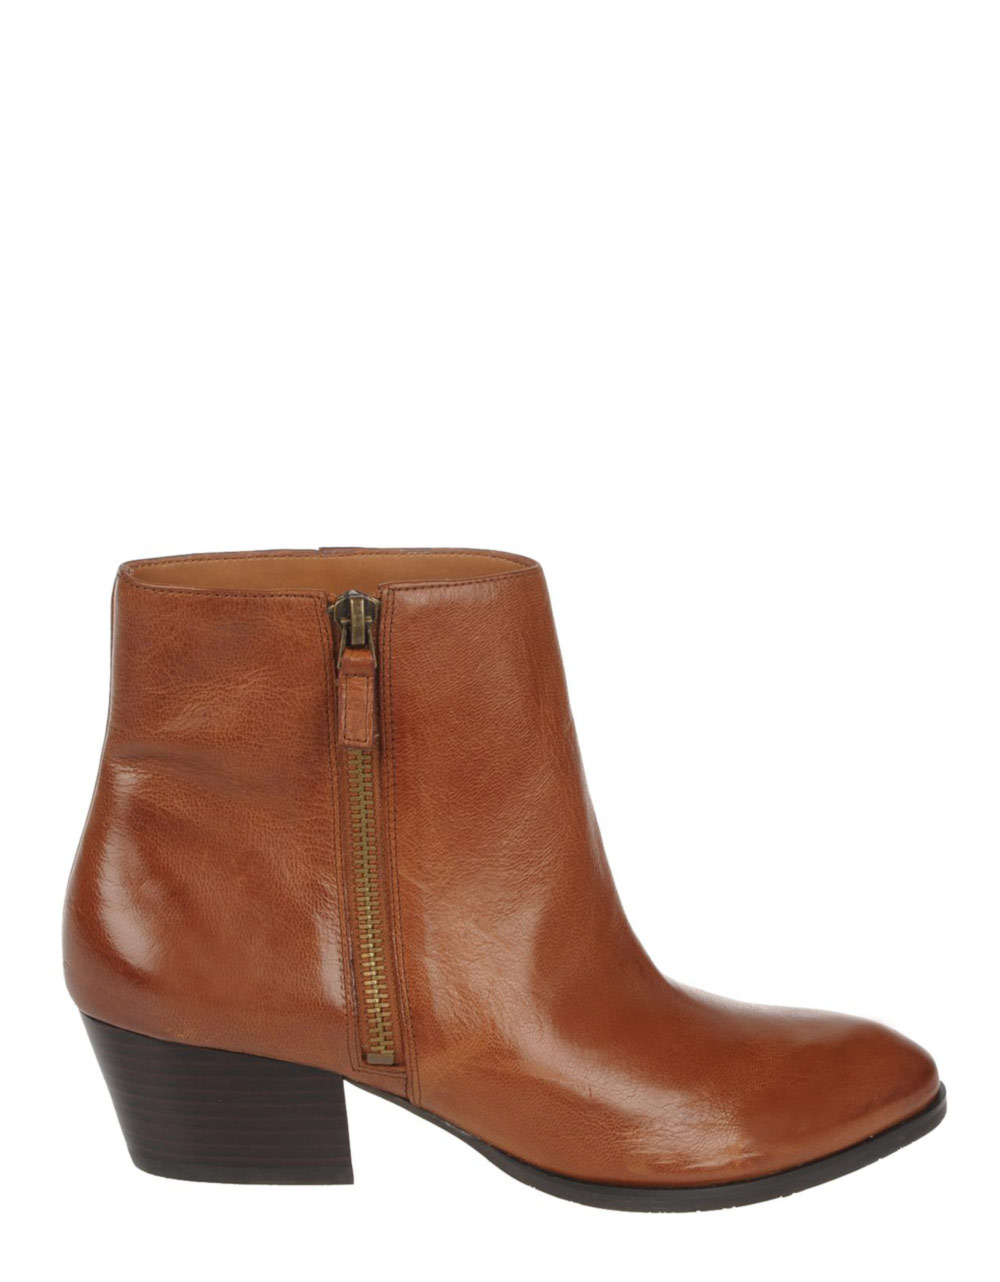 Franco Sarto Leather Ankle Boots in Brown (tan leather) | Lyst